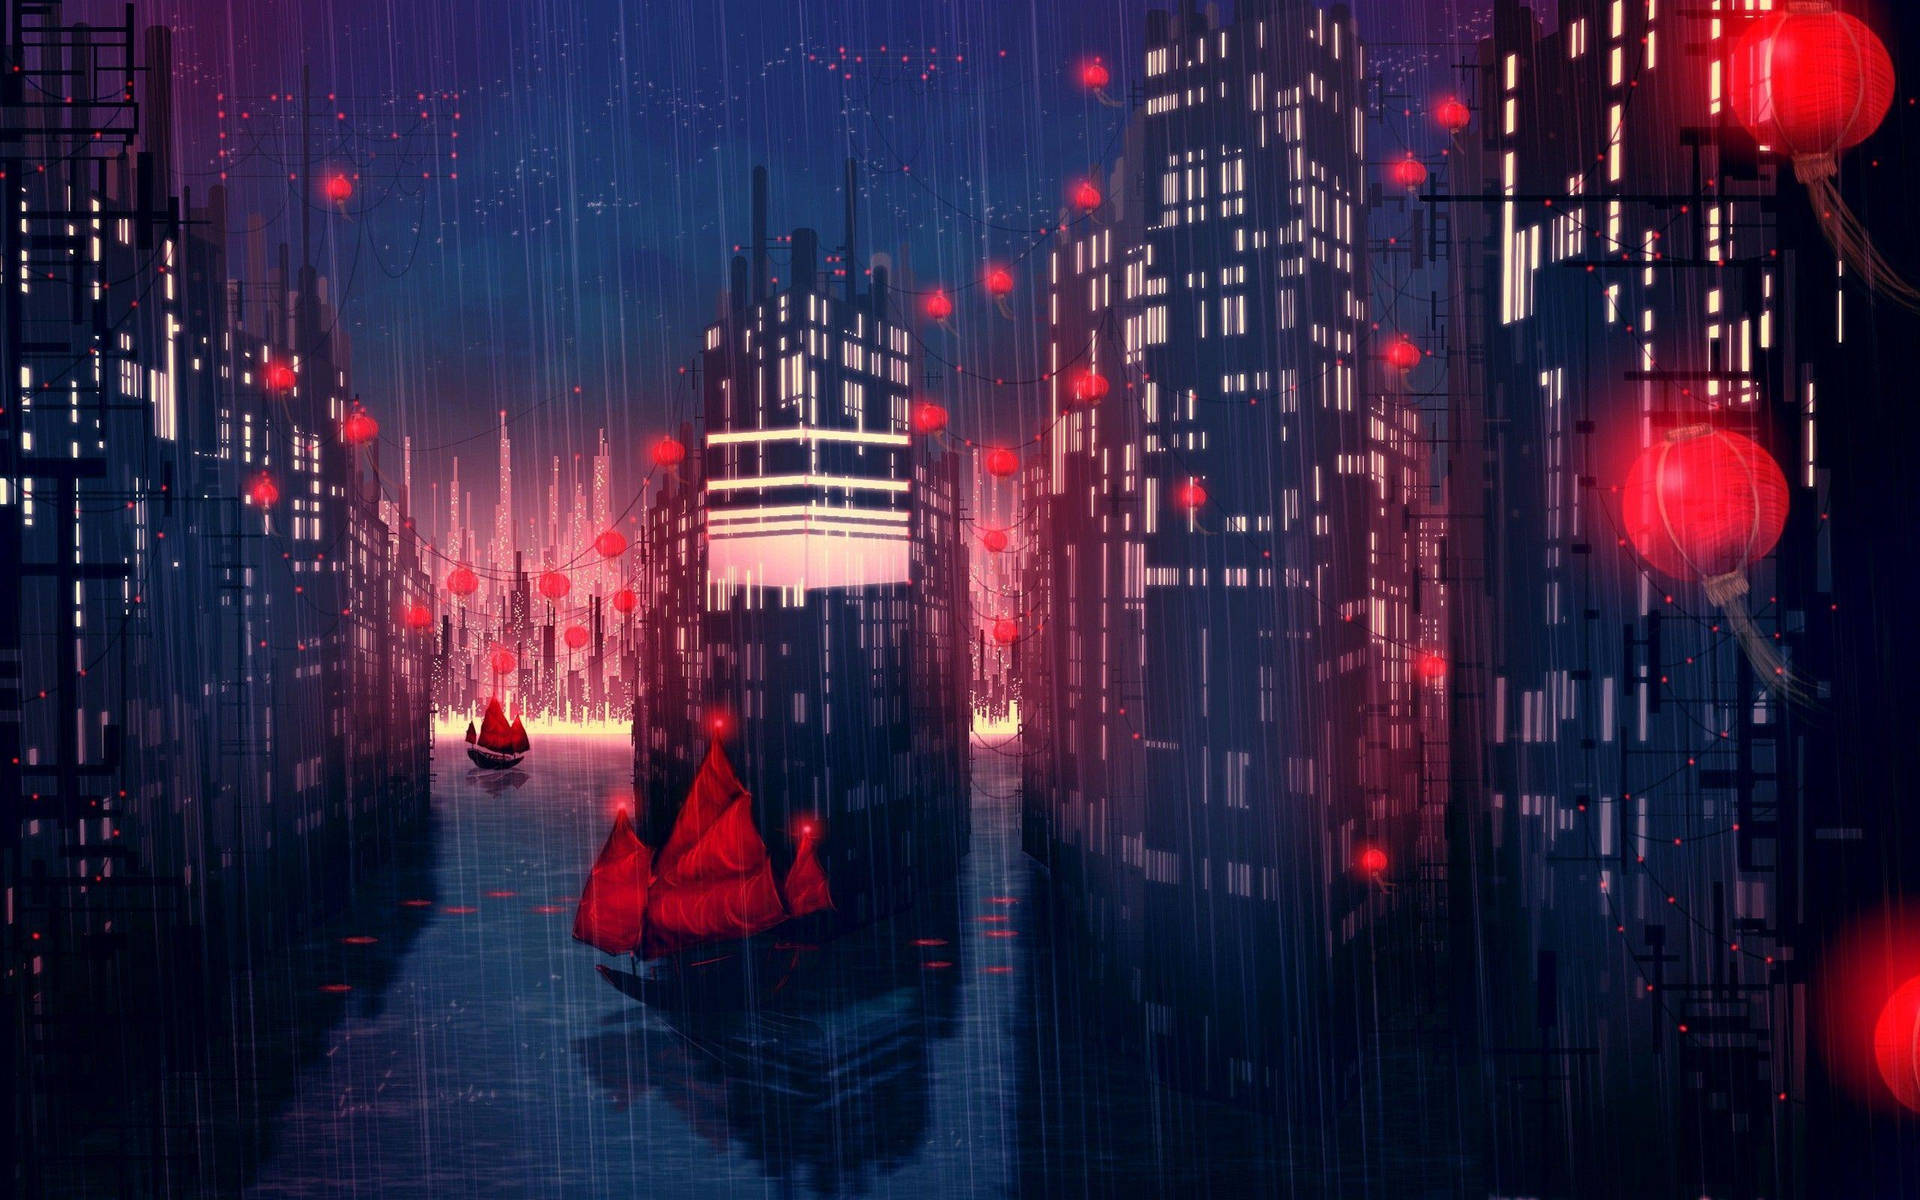 Aesthetic City Submerged In Water Background